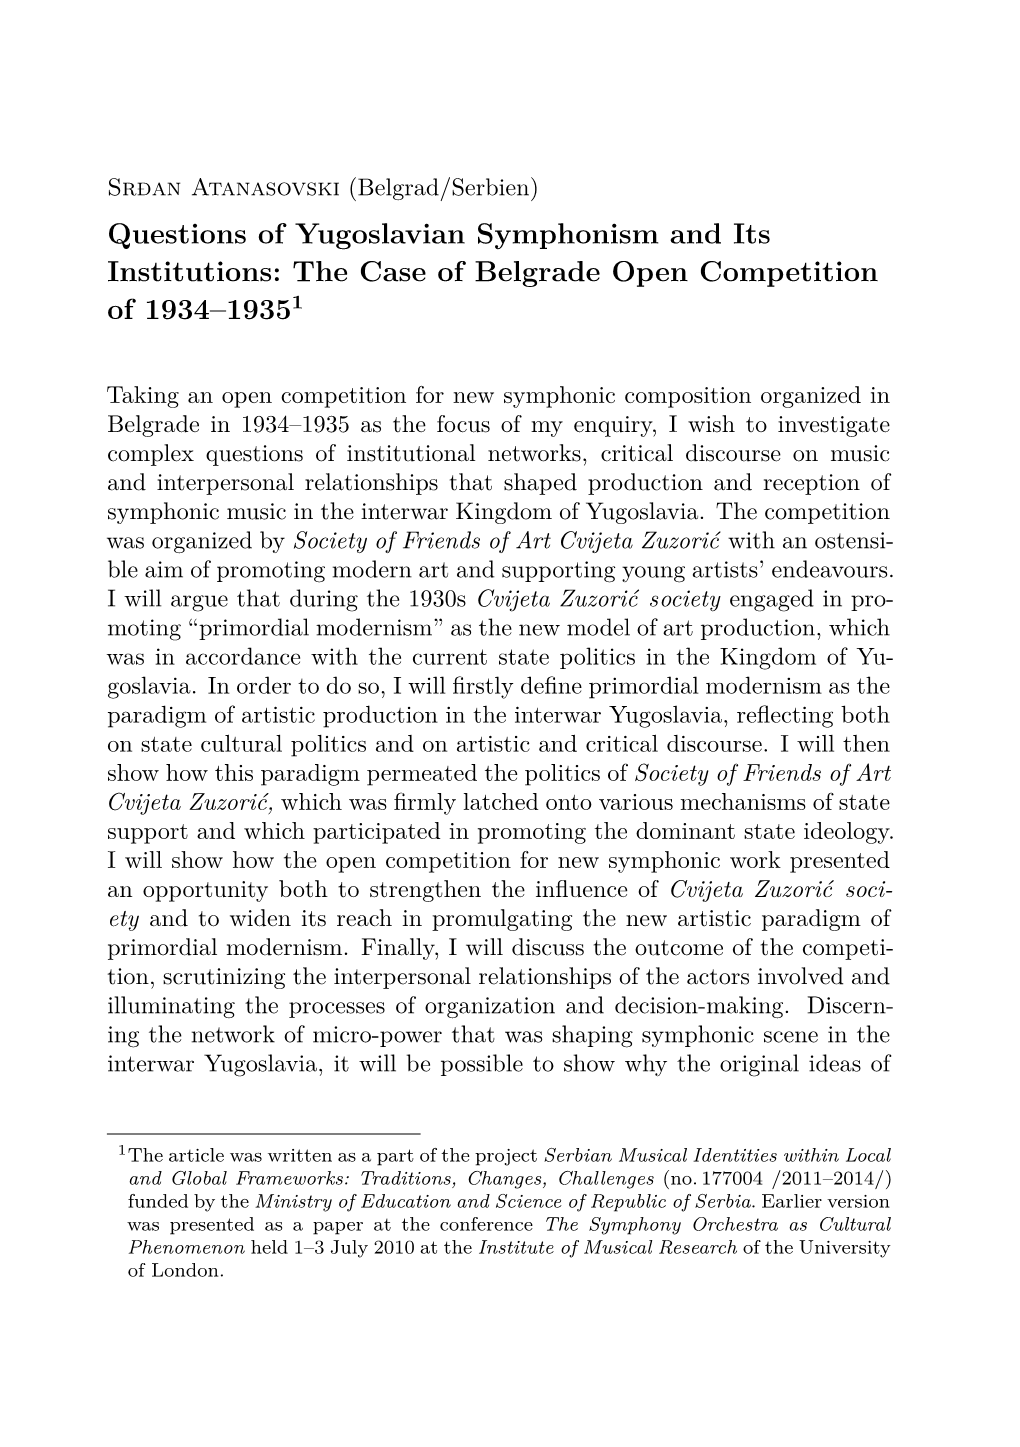 Questions of Yugoslavian Symphonism and Its Institutions: the Case of Belgrade Open Competition of 1934–19351